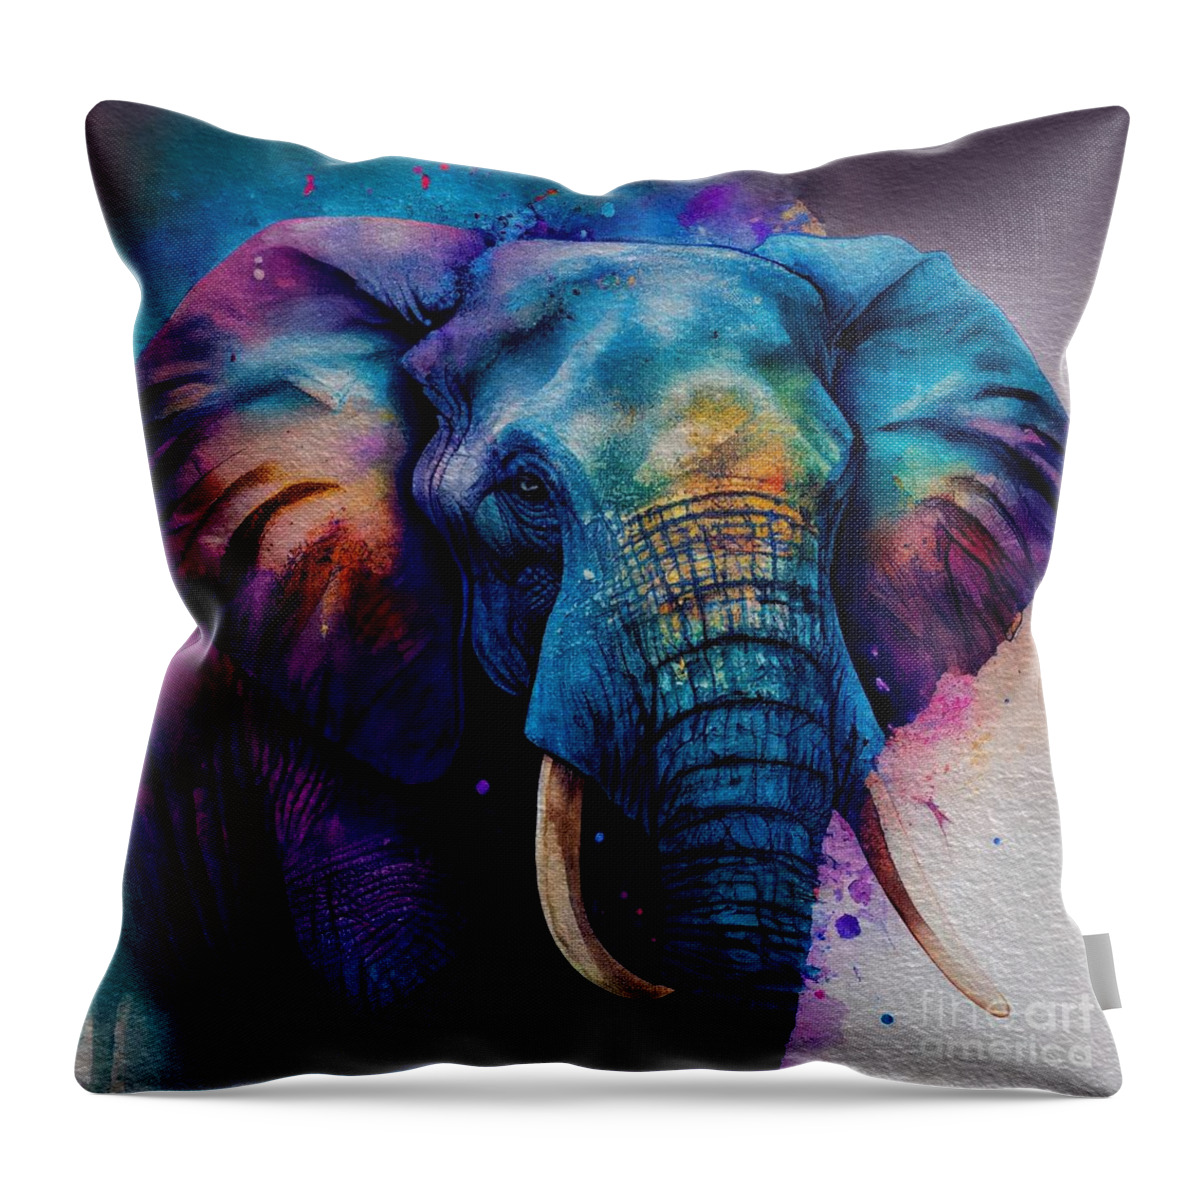  Elephant Throw Pillow featuring the digital art Elephant in watercolor by Joshua Barrios